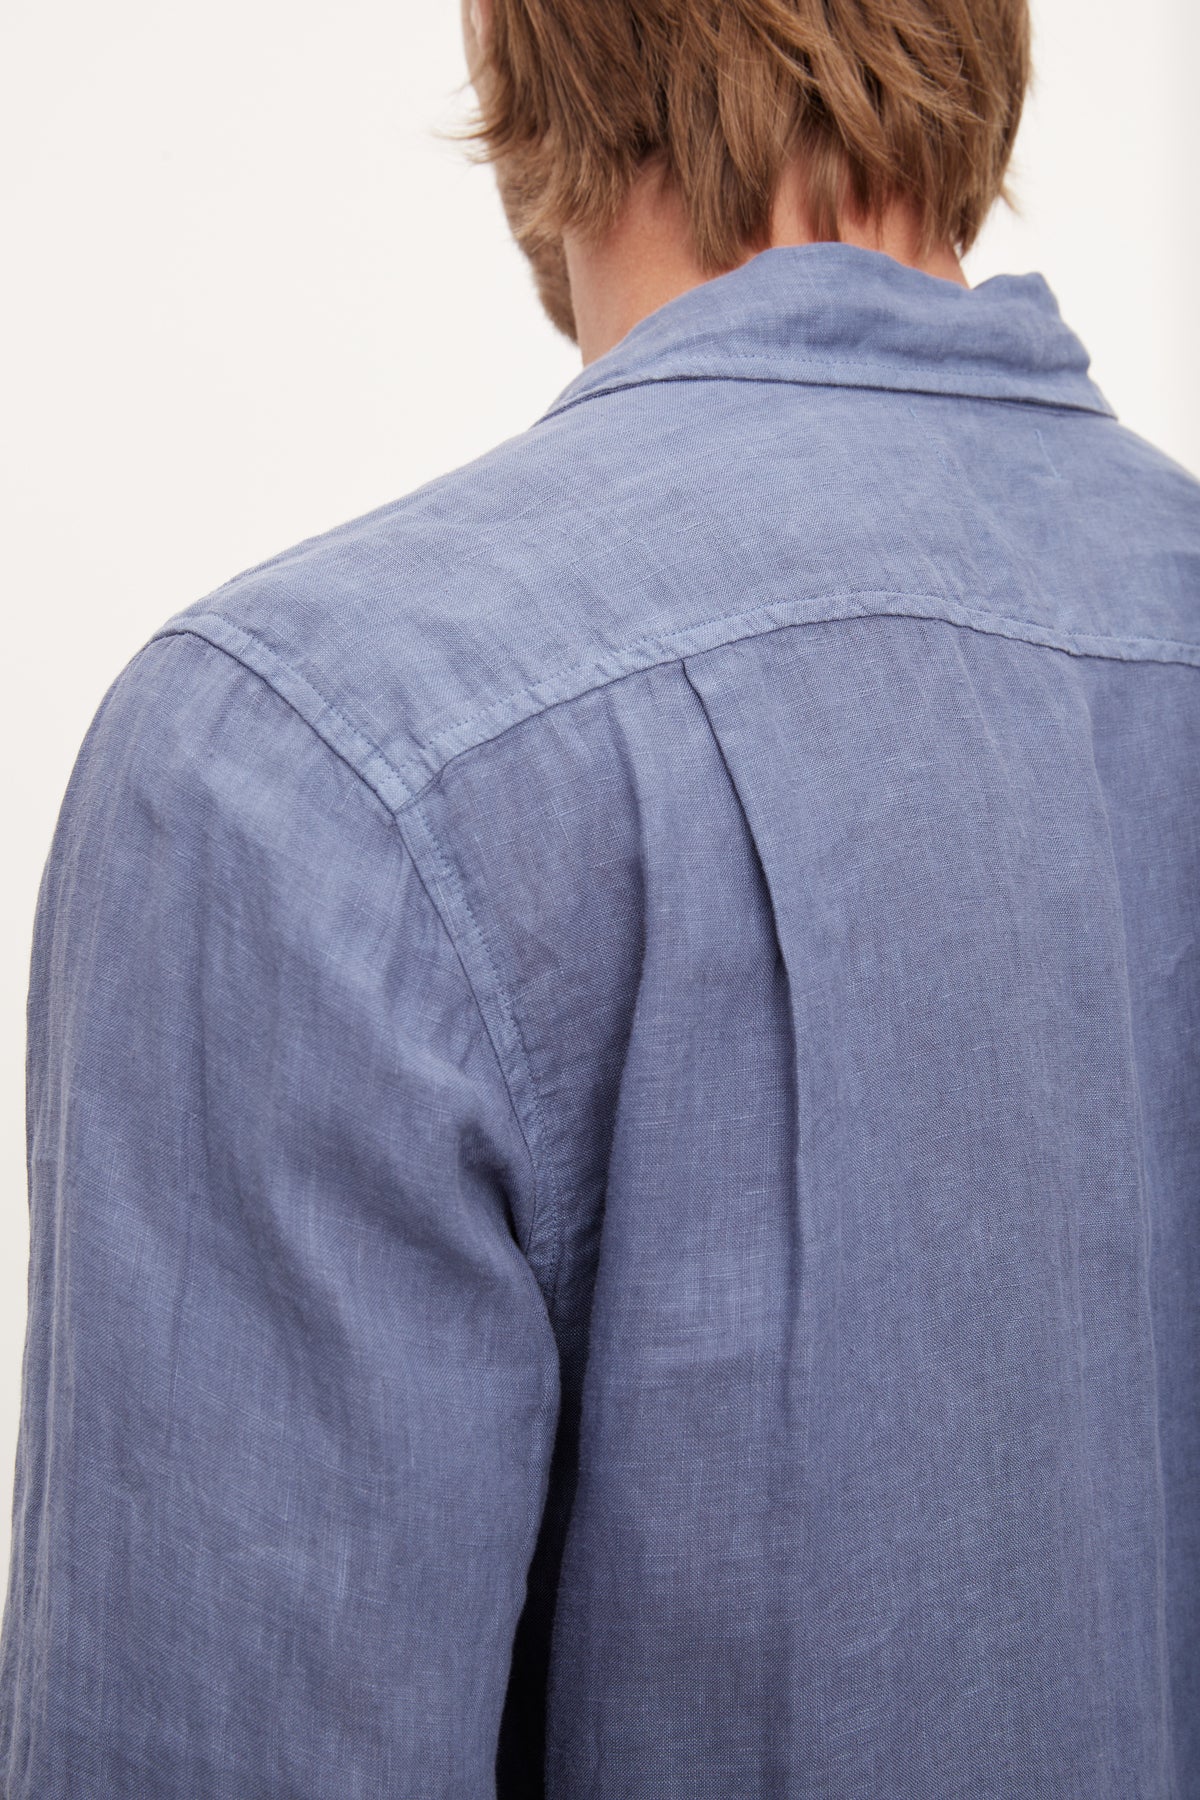 The stylish back view of a man wearing a Velvet by Graham & Spencer BENTON LINEN BUTTON-UP SHIRT.-36009360687297